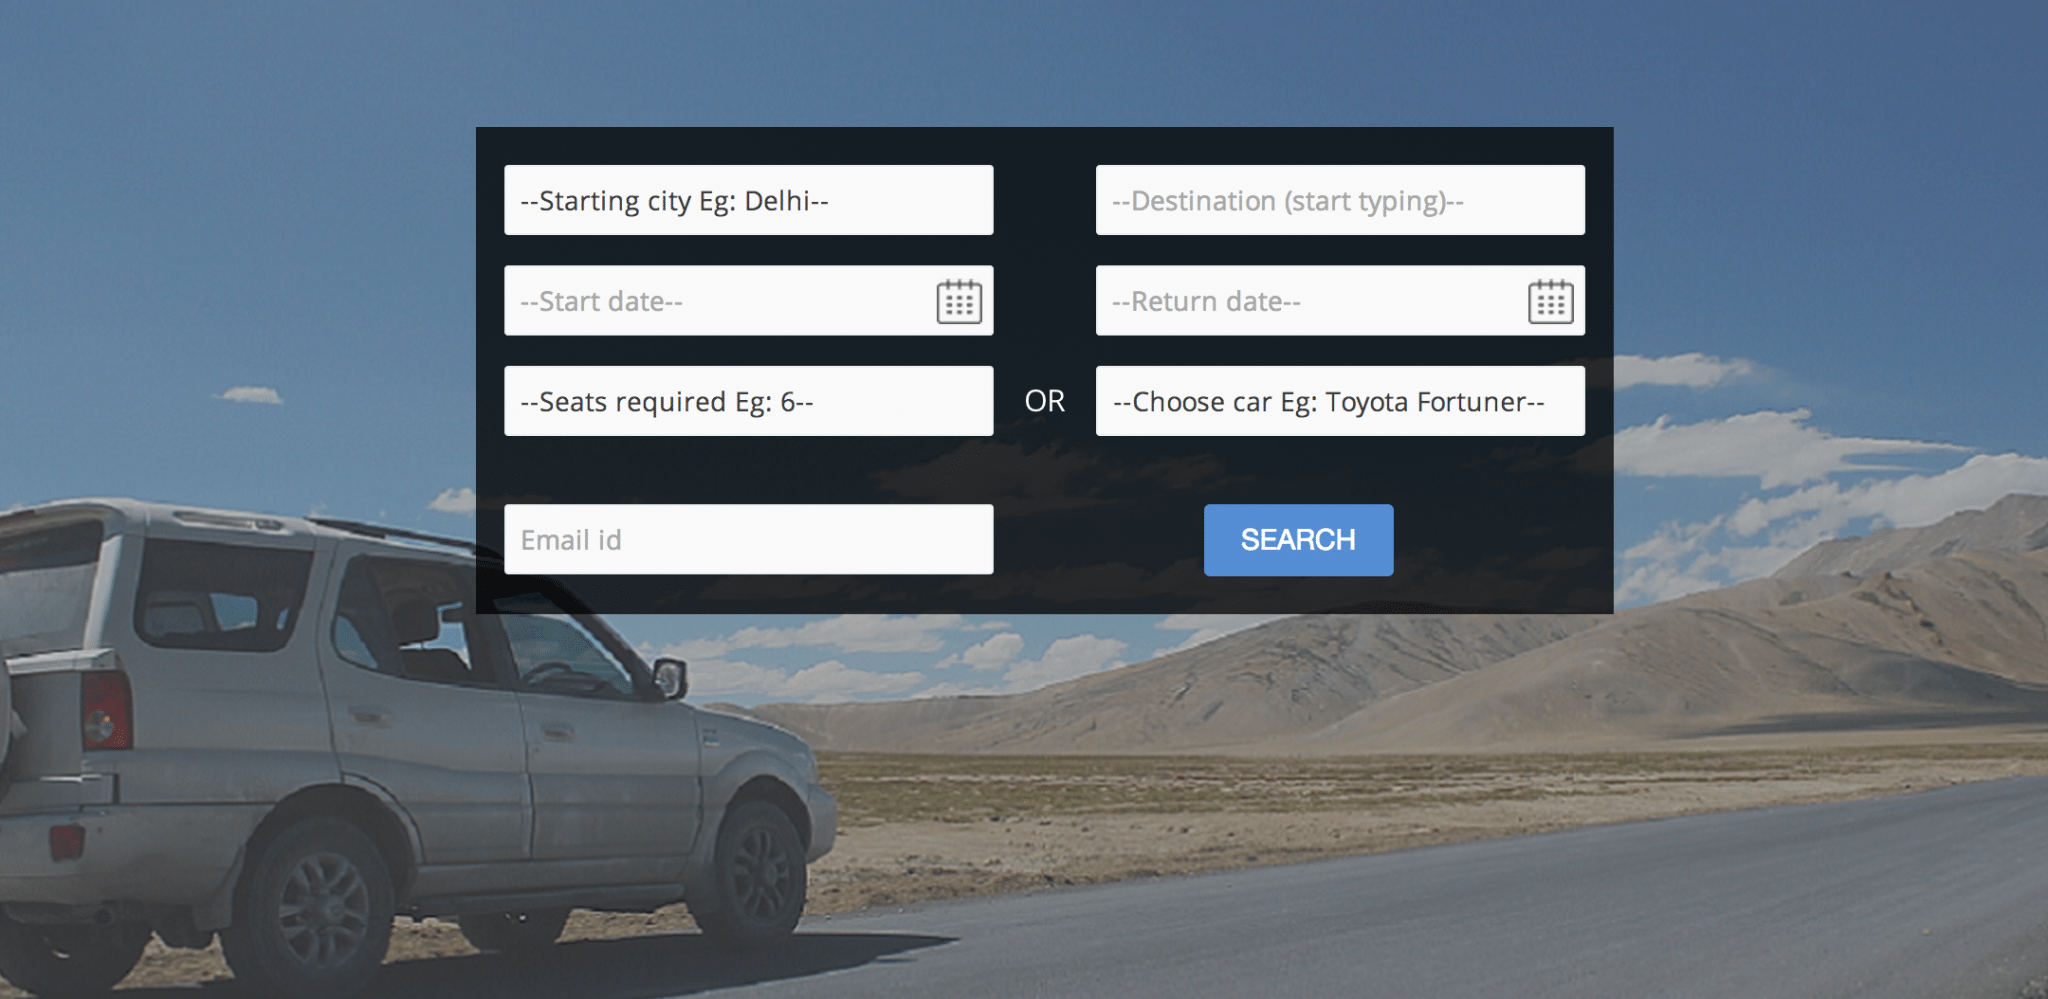 Wiwigo wants to be the Uber of remote car travel.